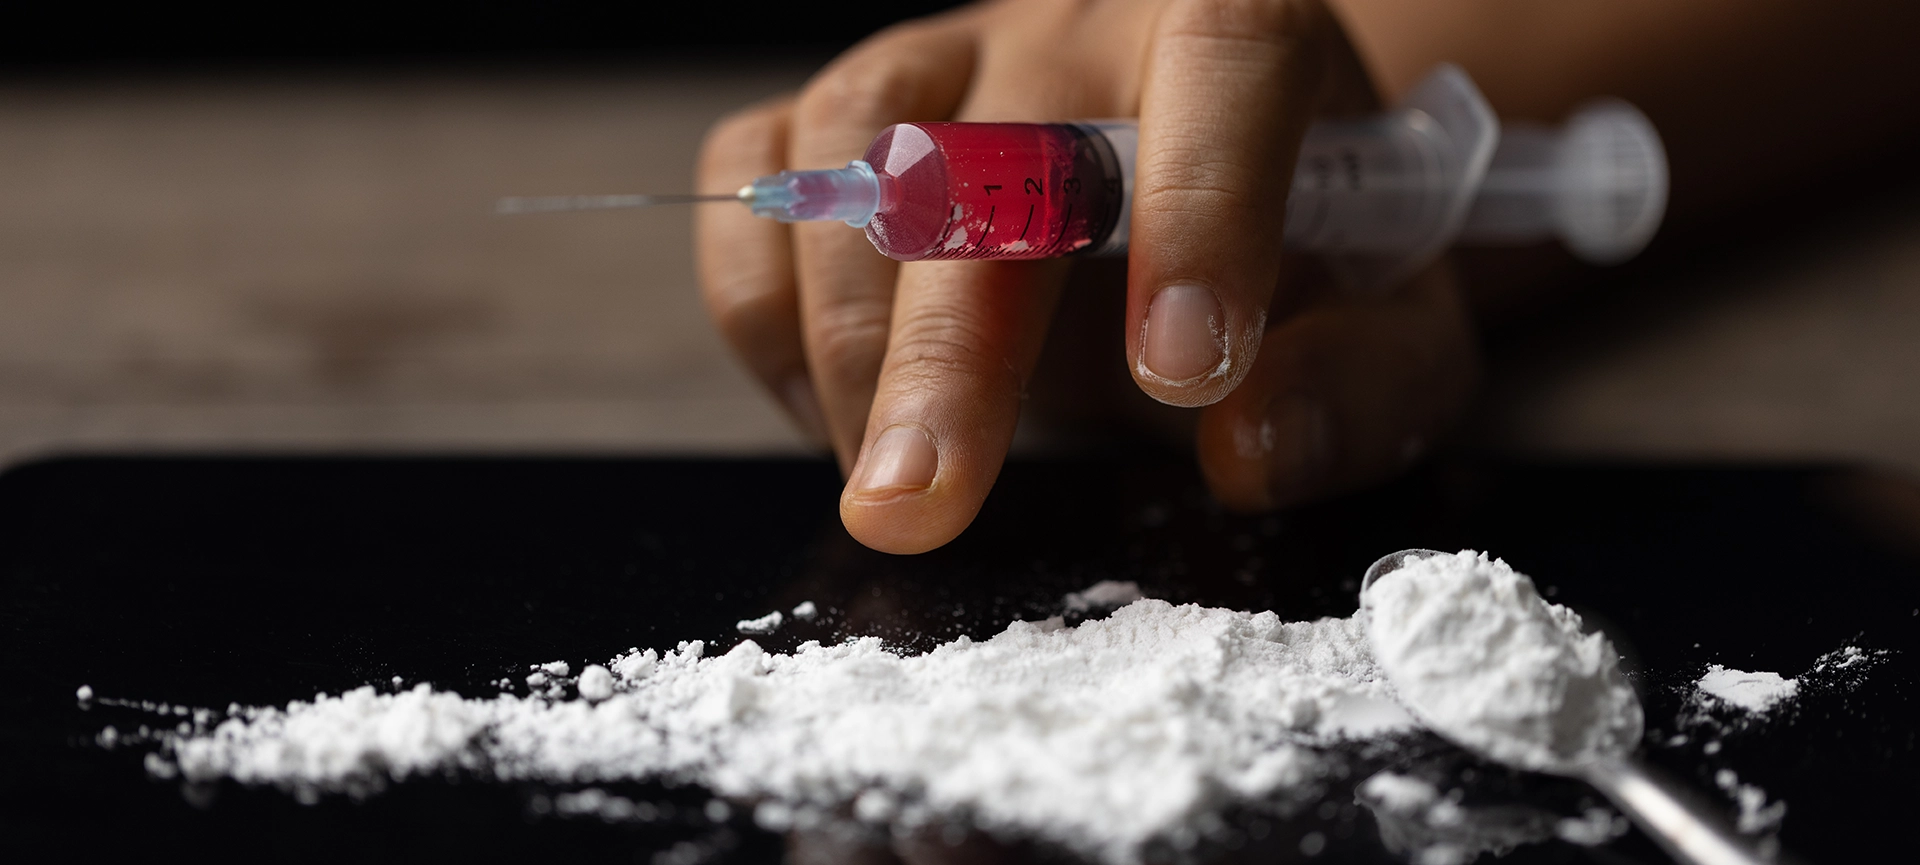 treatment options for heroin addiction